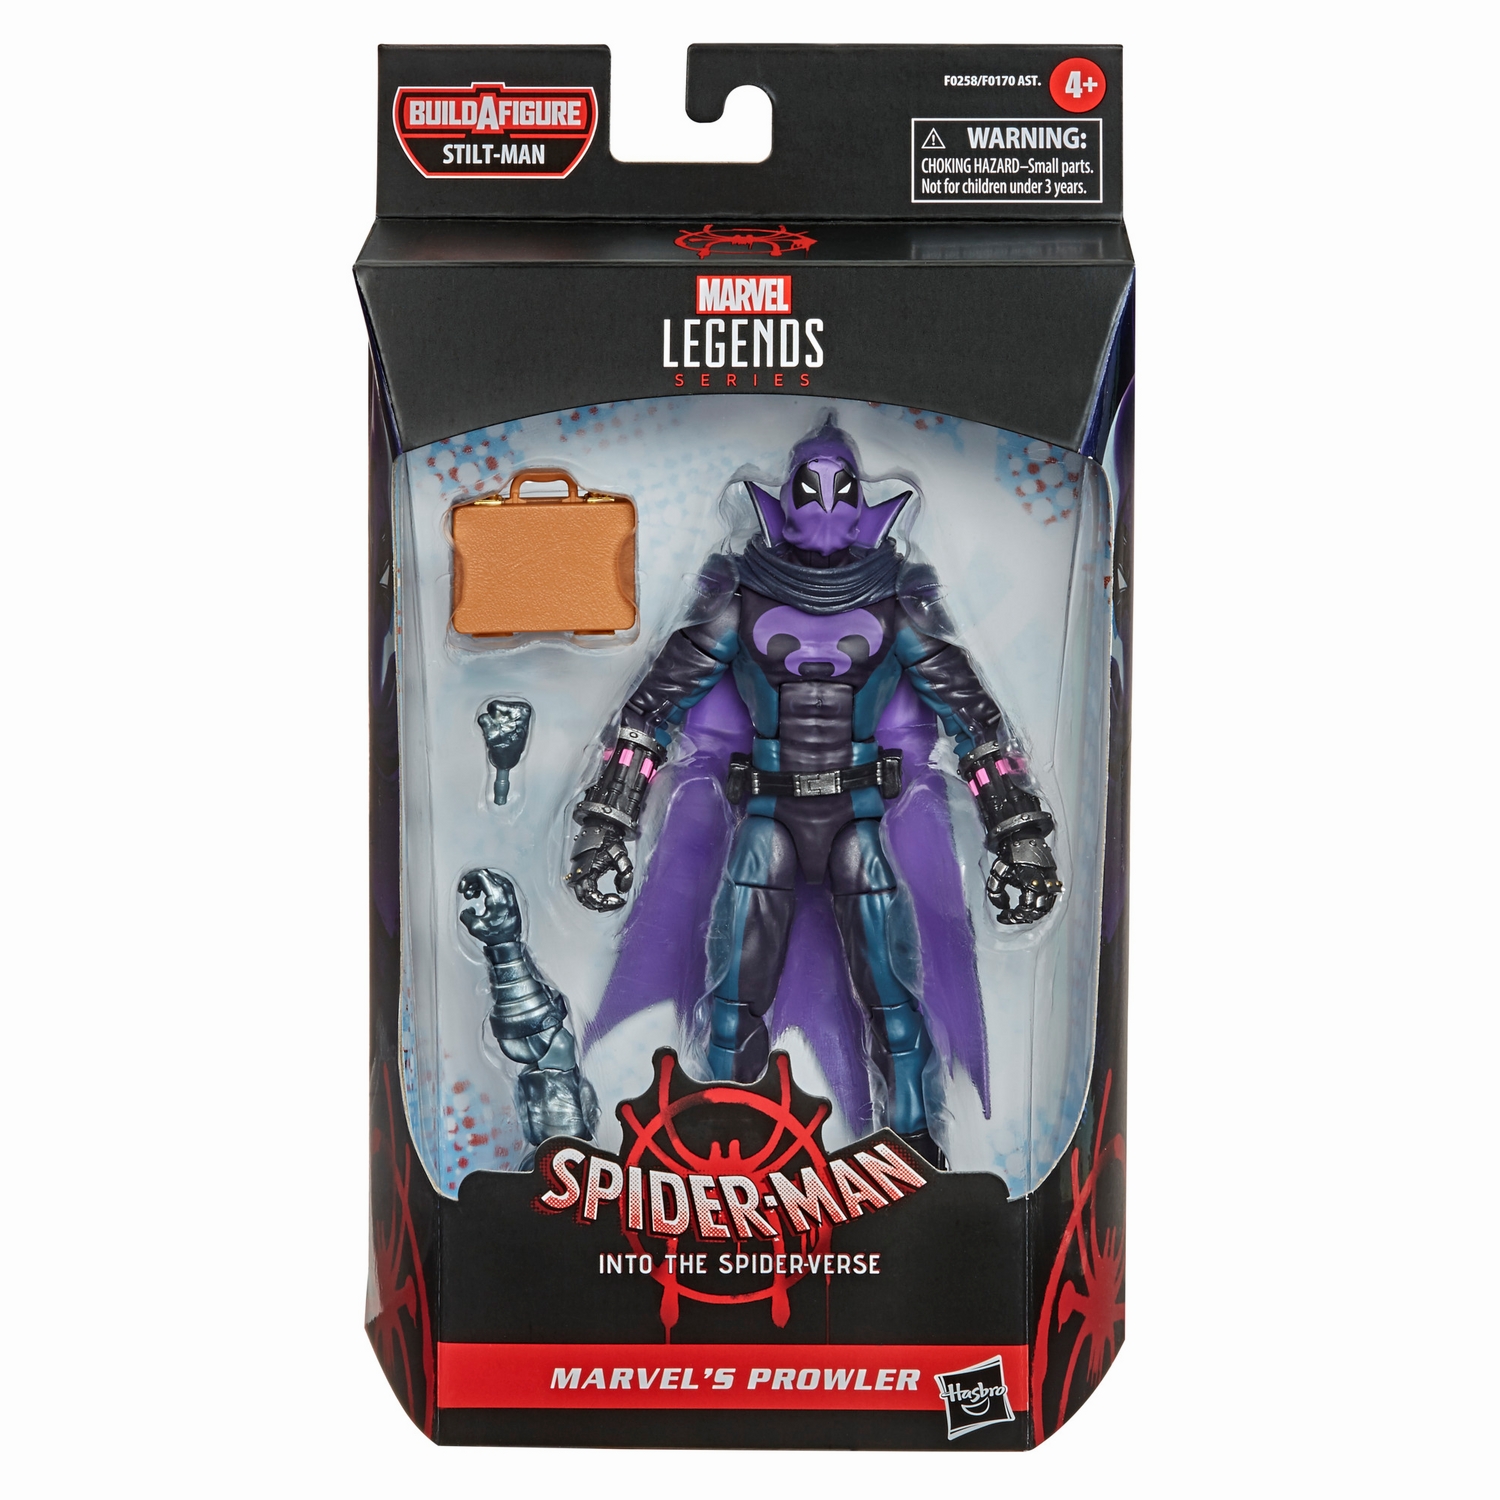 MARVEL LEGENDS SERIES SPIDER-MAN INTO THE SPIDER-VERSE 6-INCH MARVEL’S PROWLER Figure - in pck.jpg